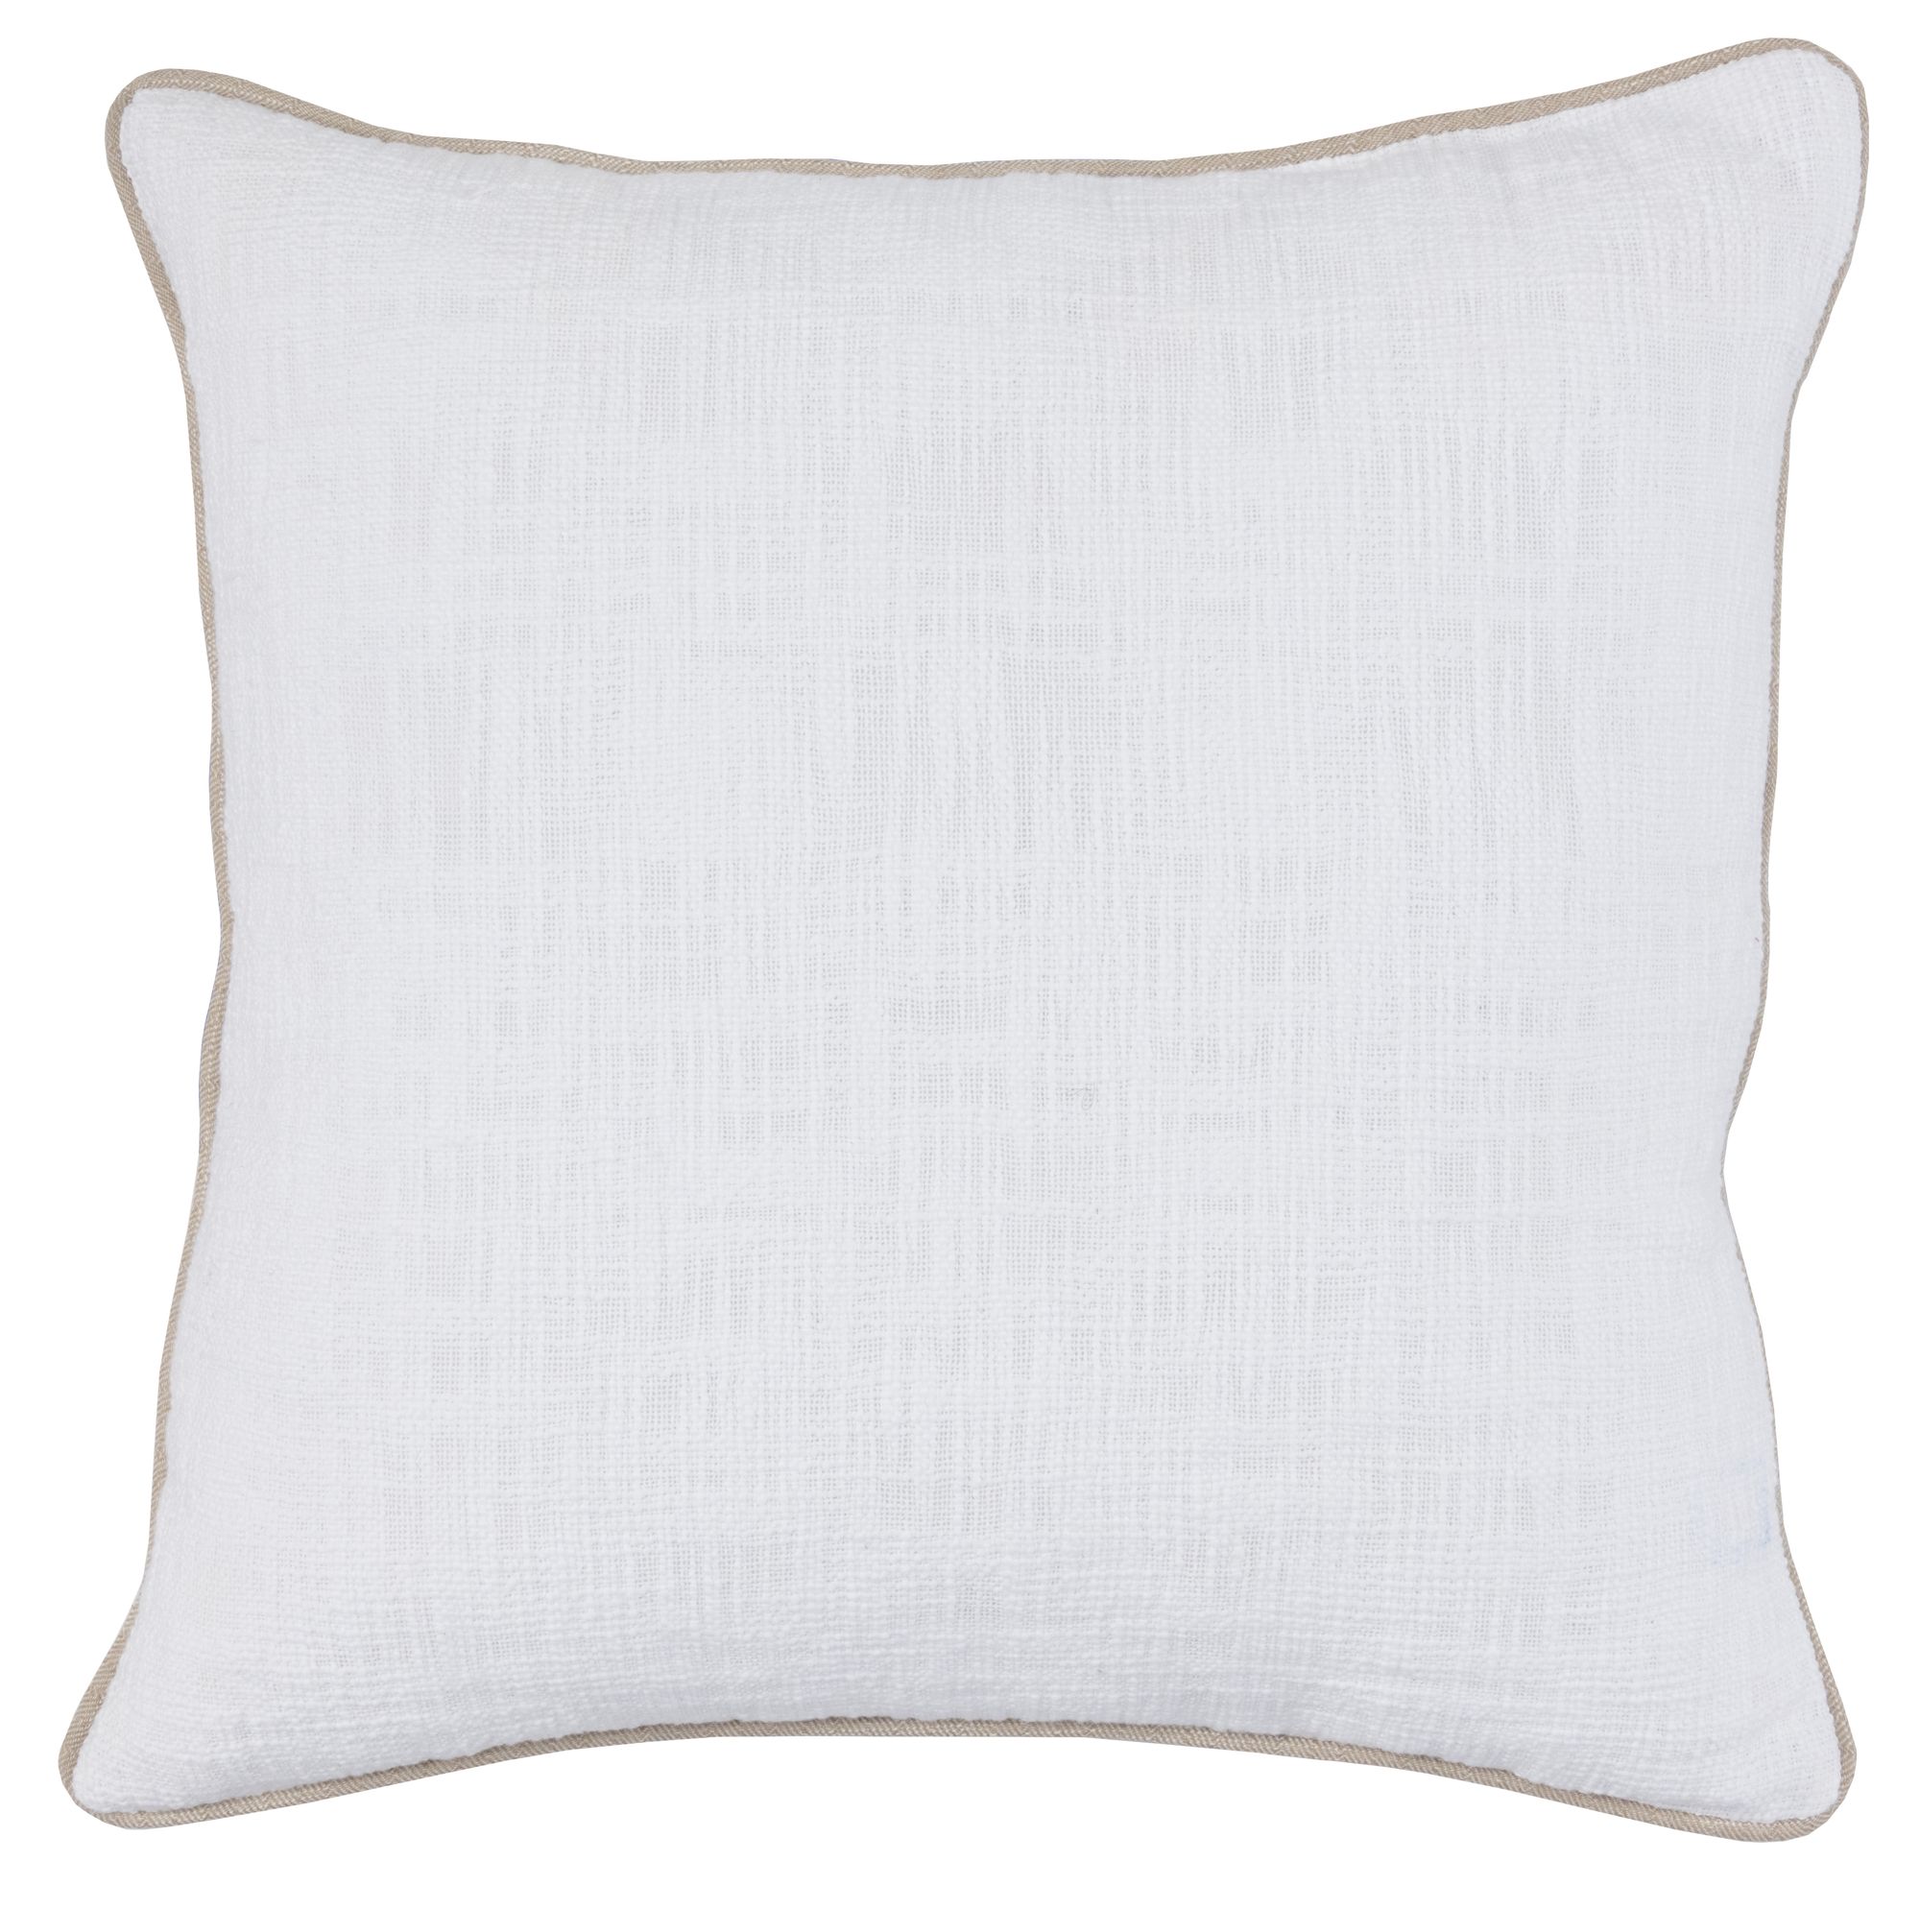 Alwyn Home Nellie Extra Firm Bed Pillow, Size: Standard, White